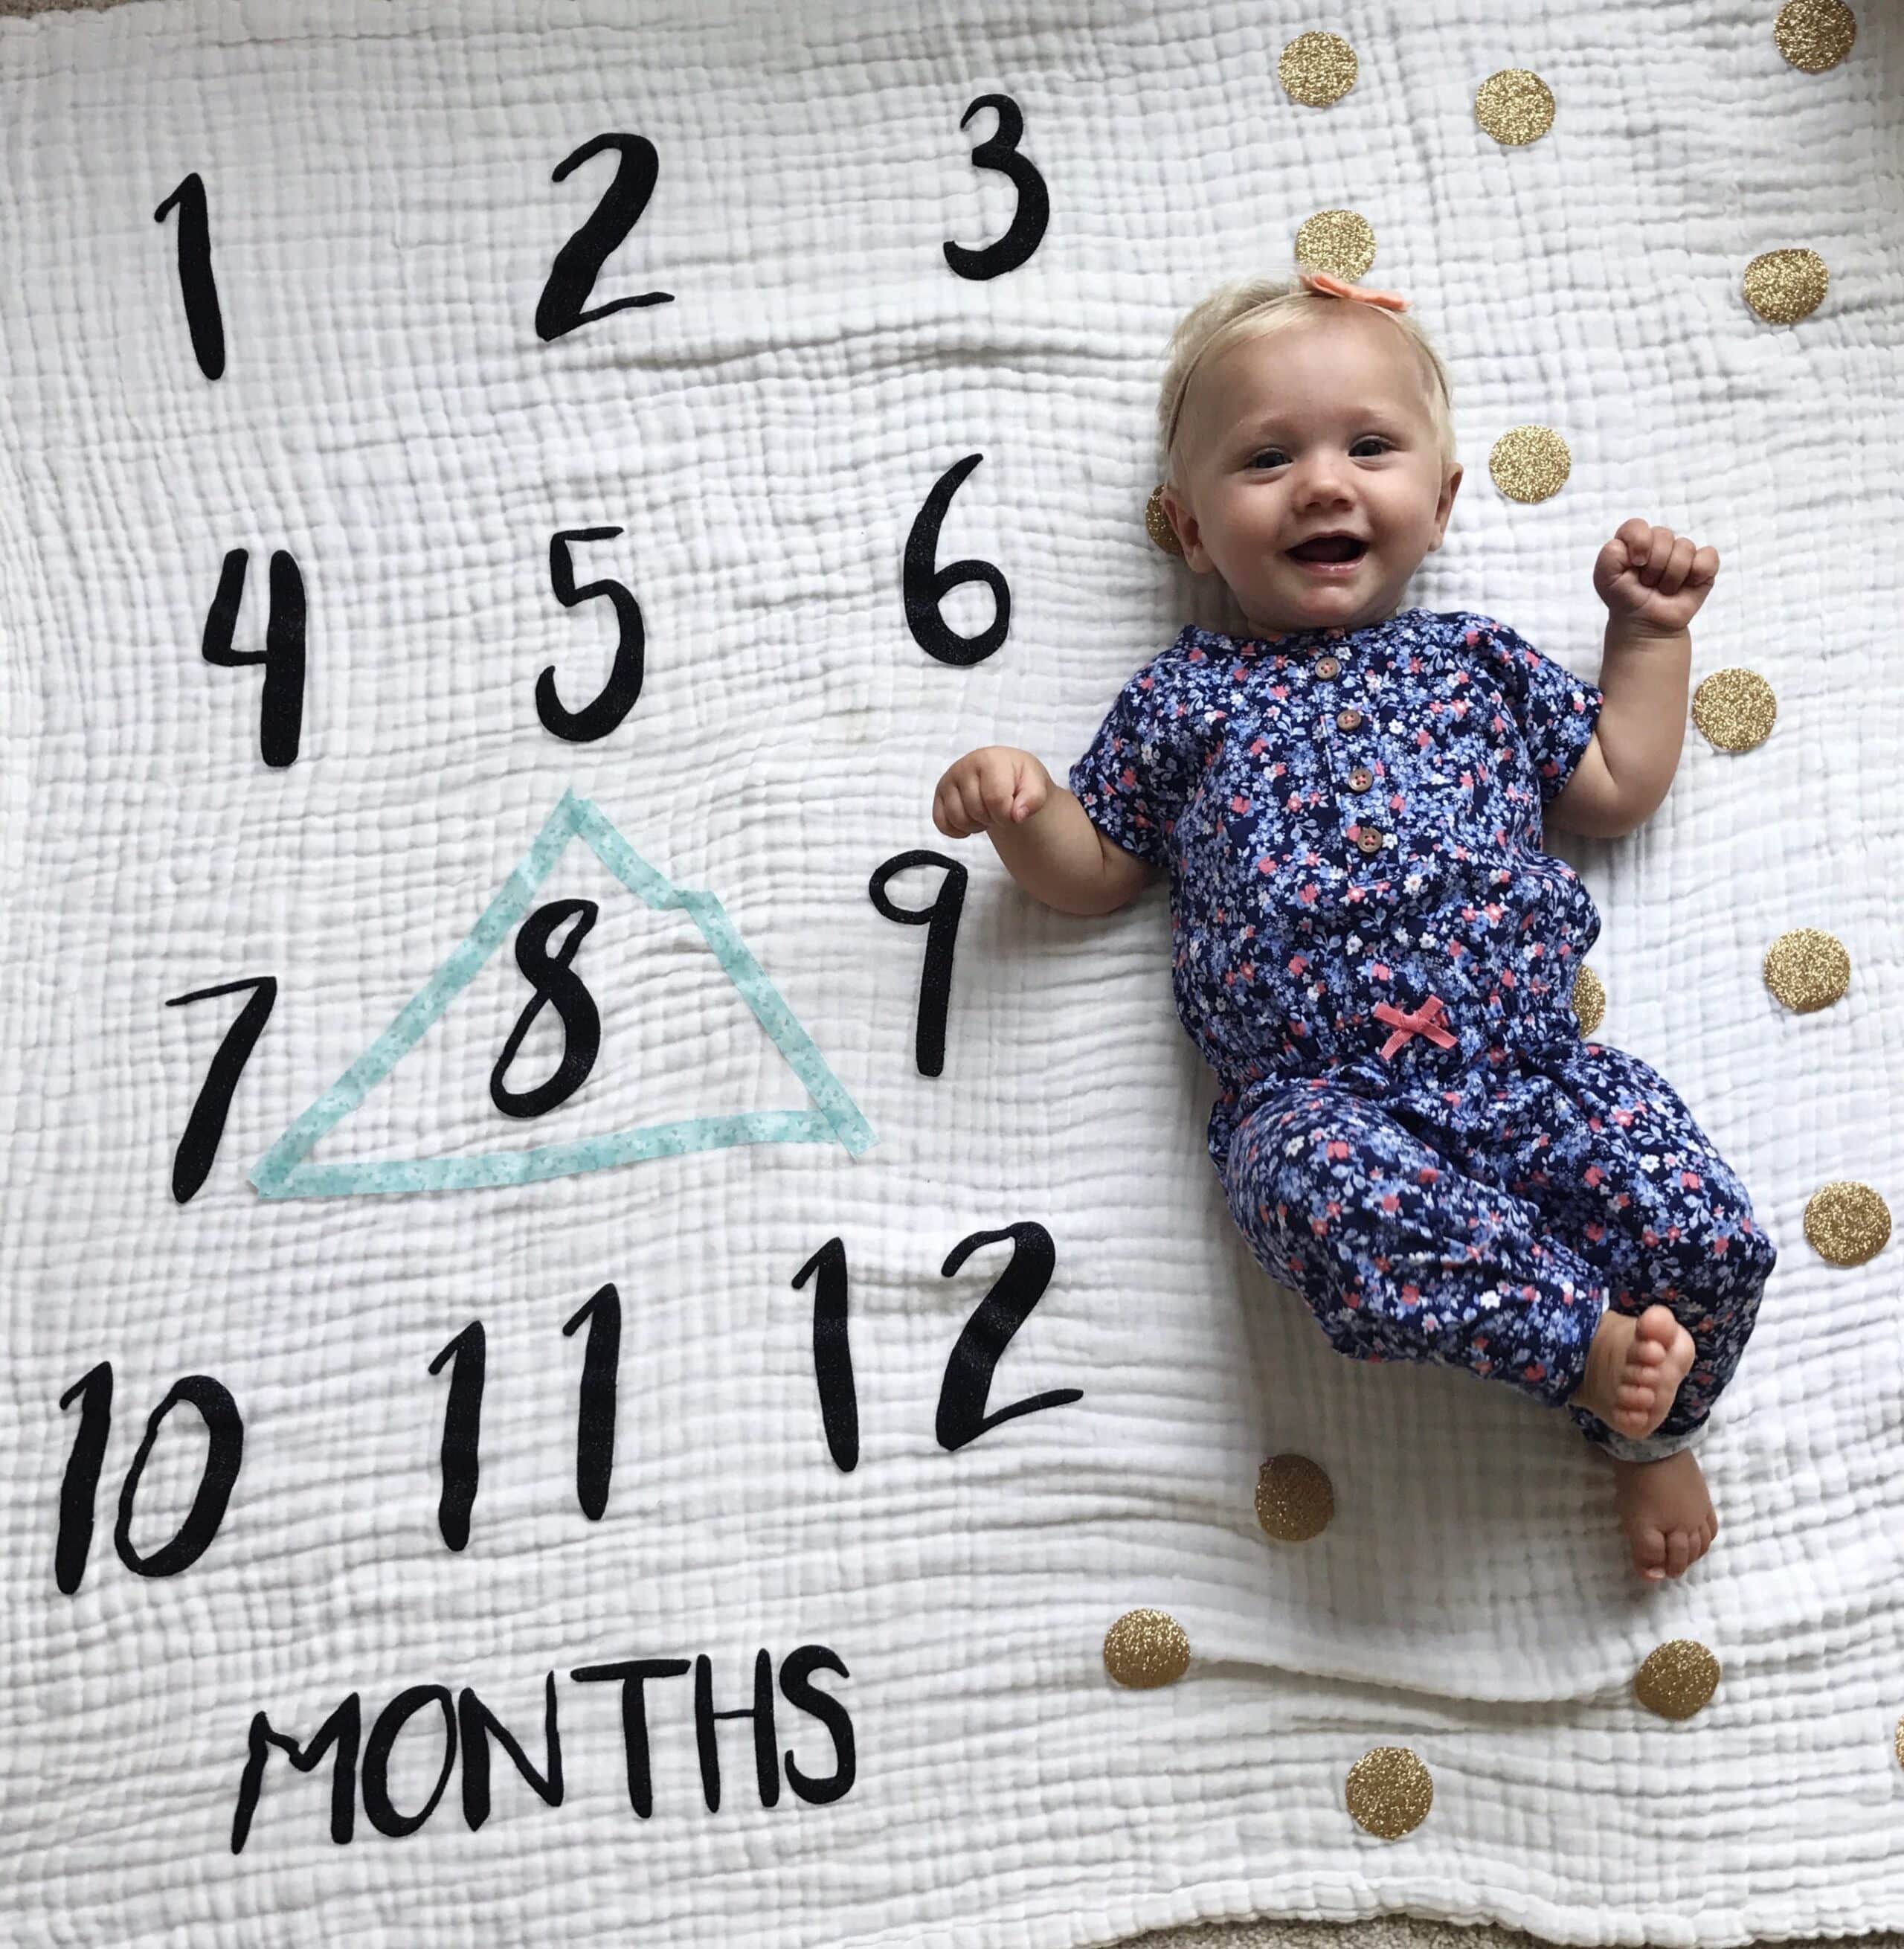 4 months old. 8 Months картинки. 9 Months 4 года малышу. Eight month. 5 Months картинки- картинки.